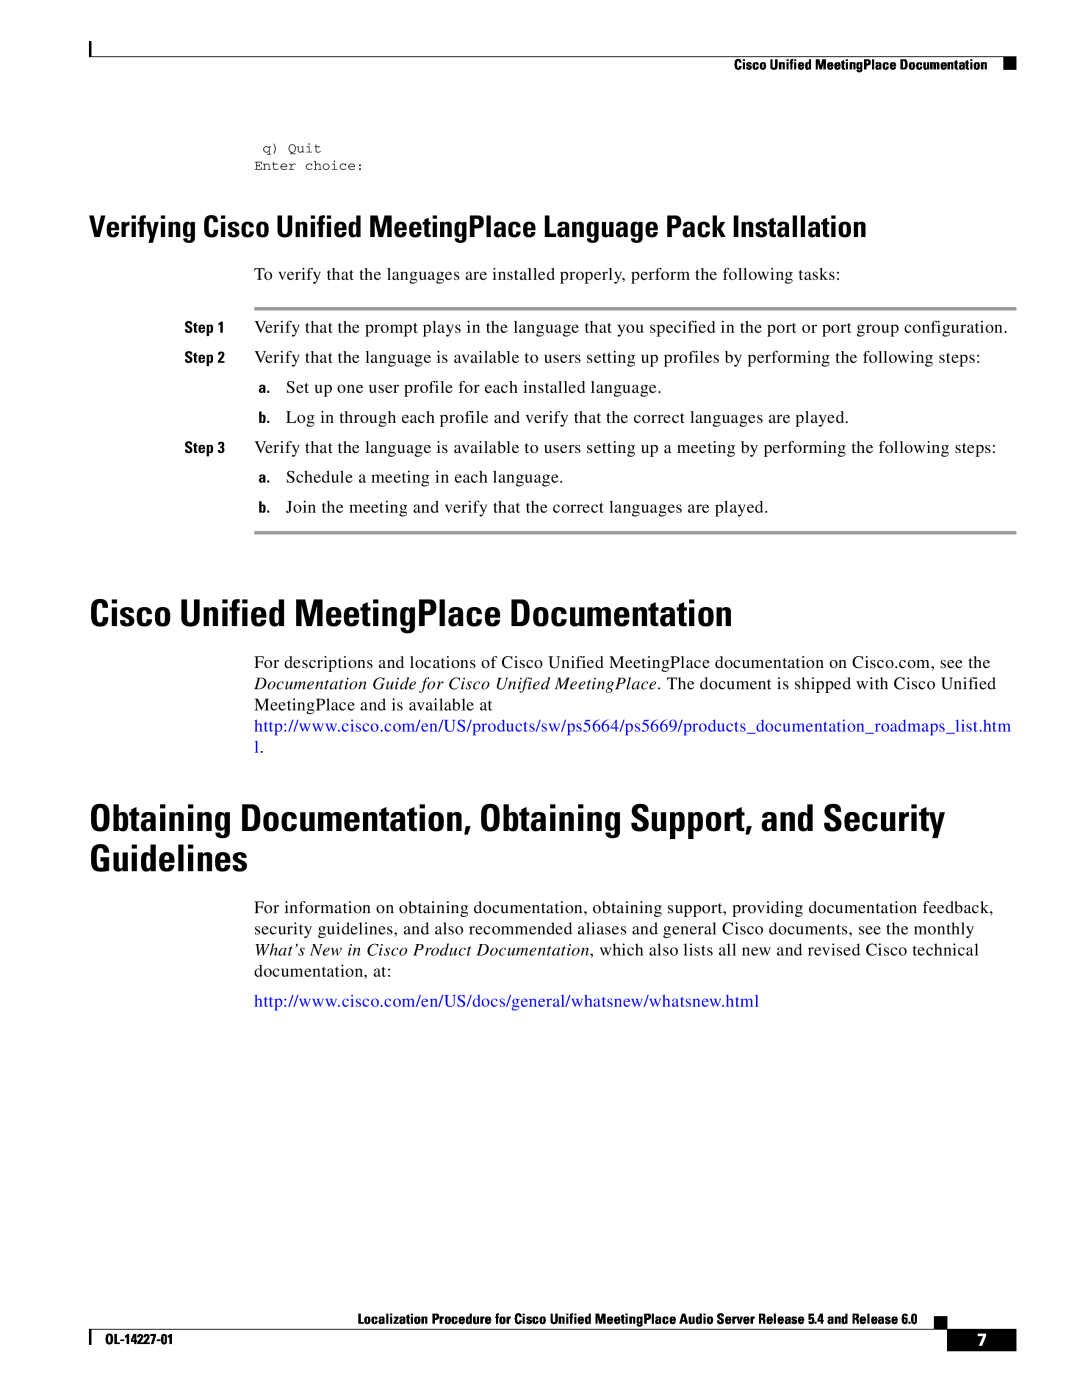 Cisco Systems 6 Cisco Unified MeetingPlace Documentation, Verifying Cisco Unified MeetingPlace Language Pack Installation 